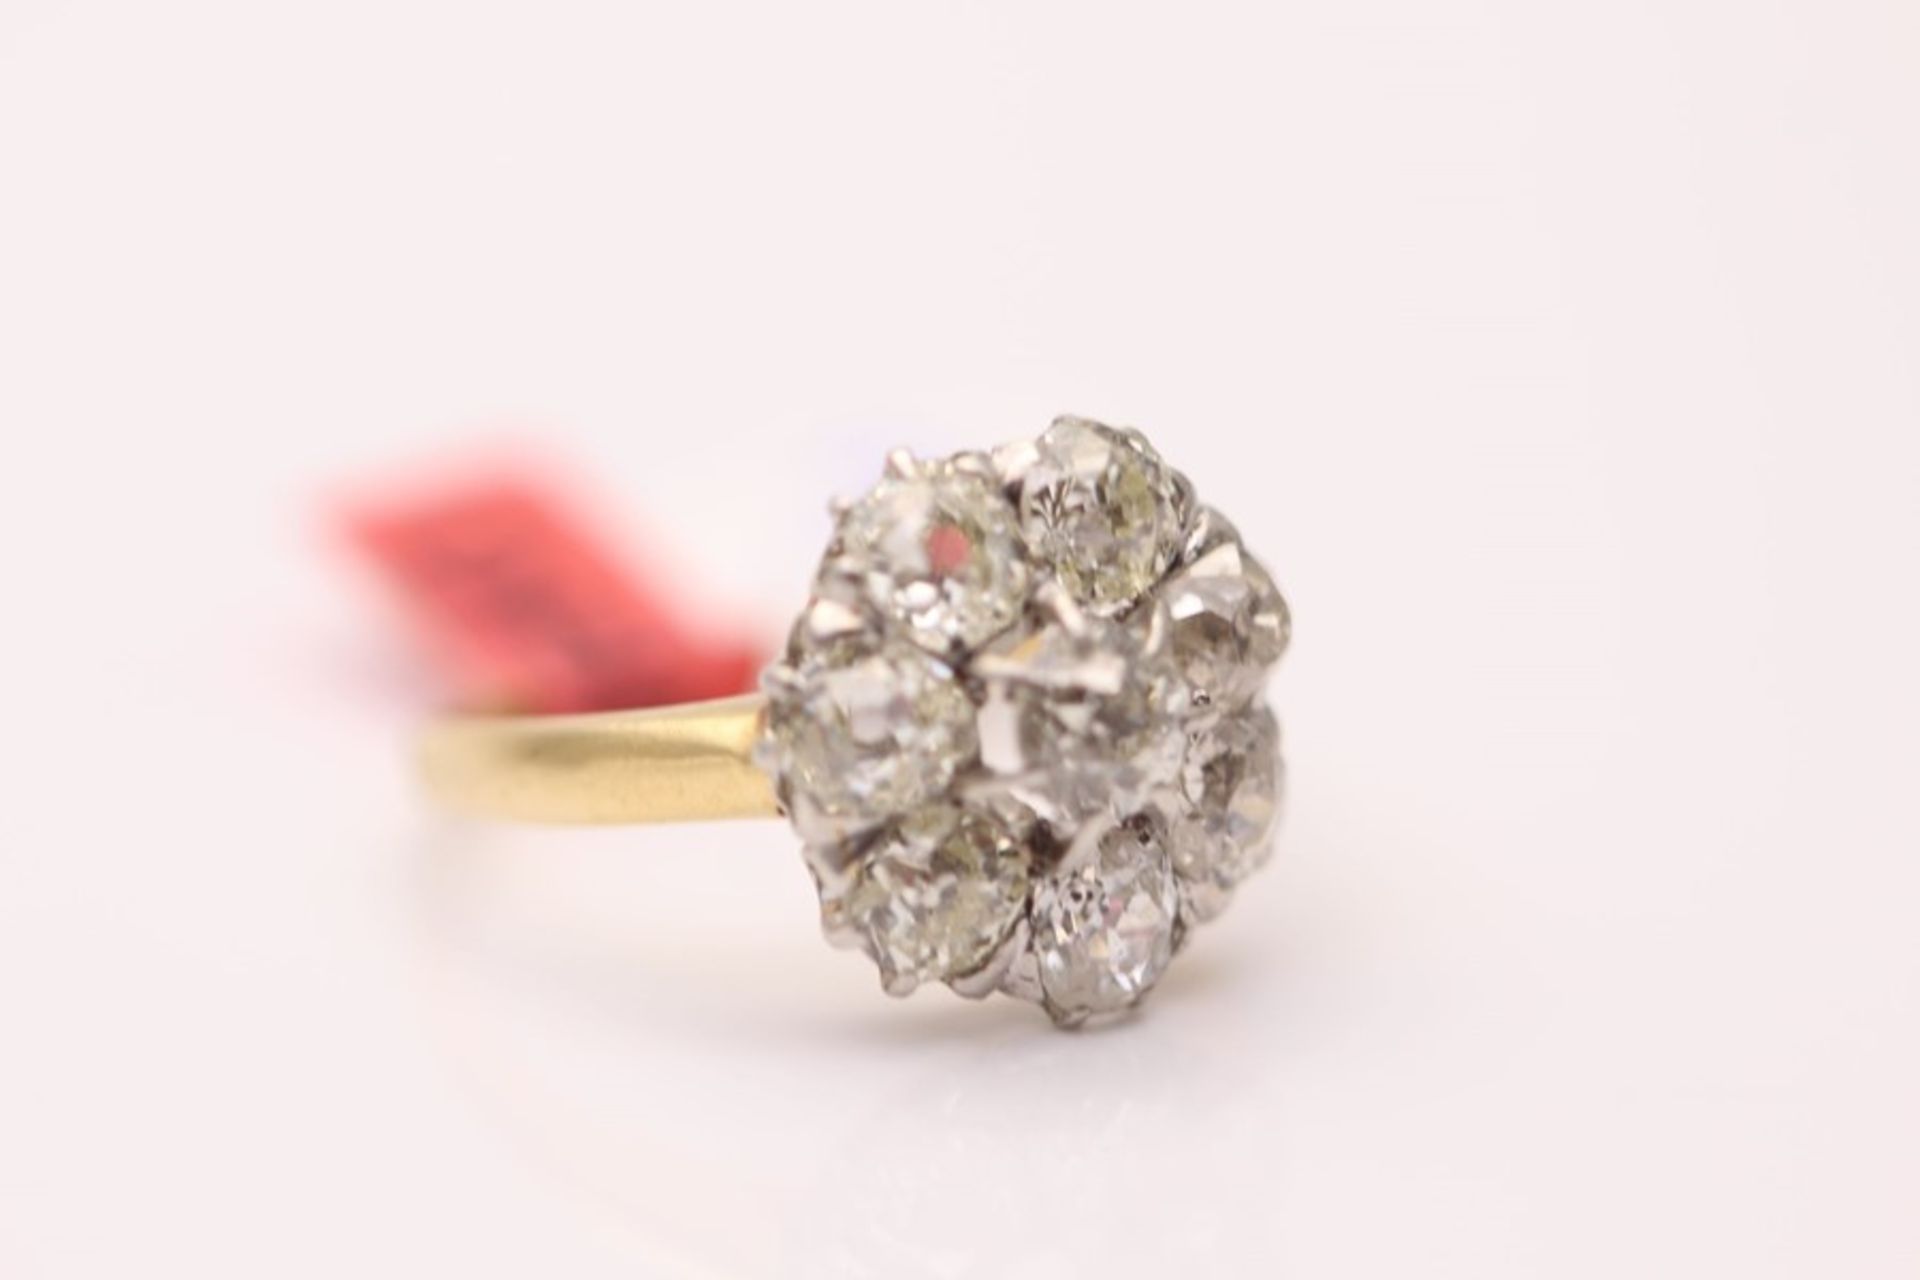 18CT YELLOW GOLD DIAMOND CLUSTER RING - Image 2 of 4